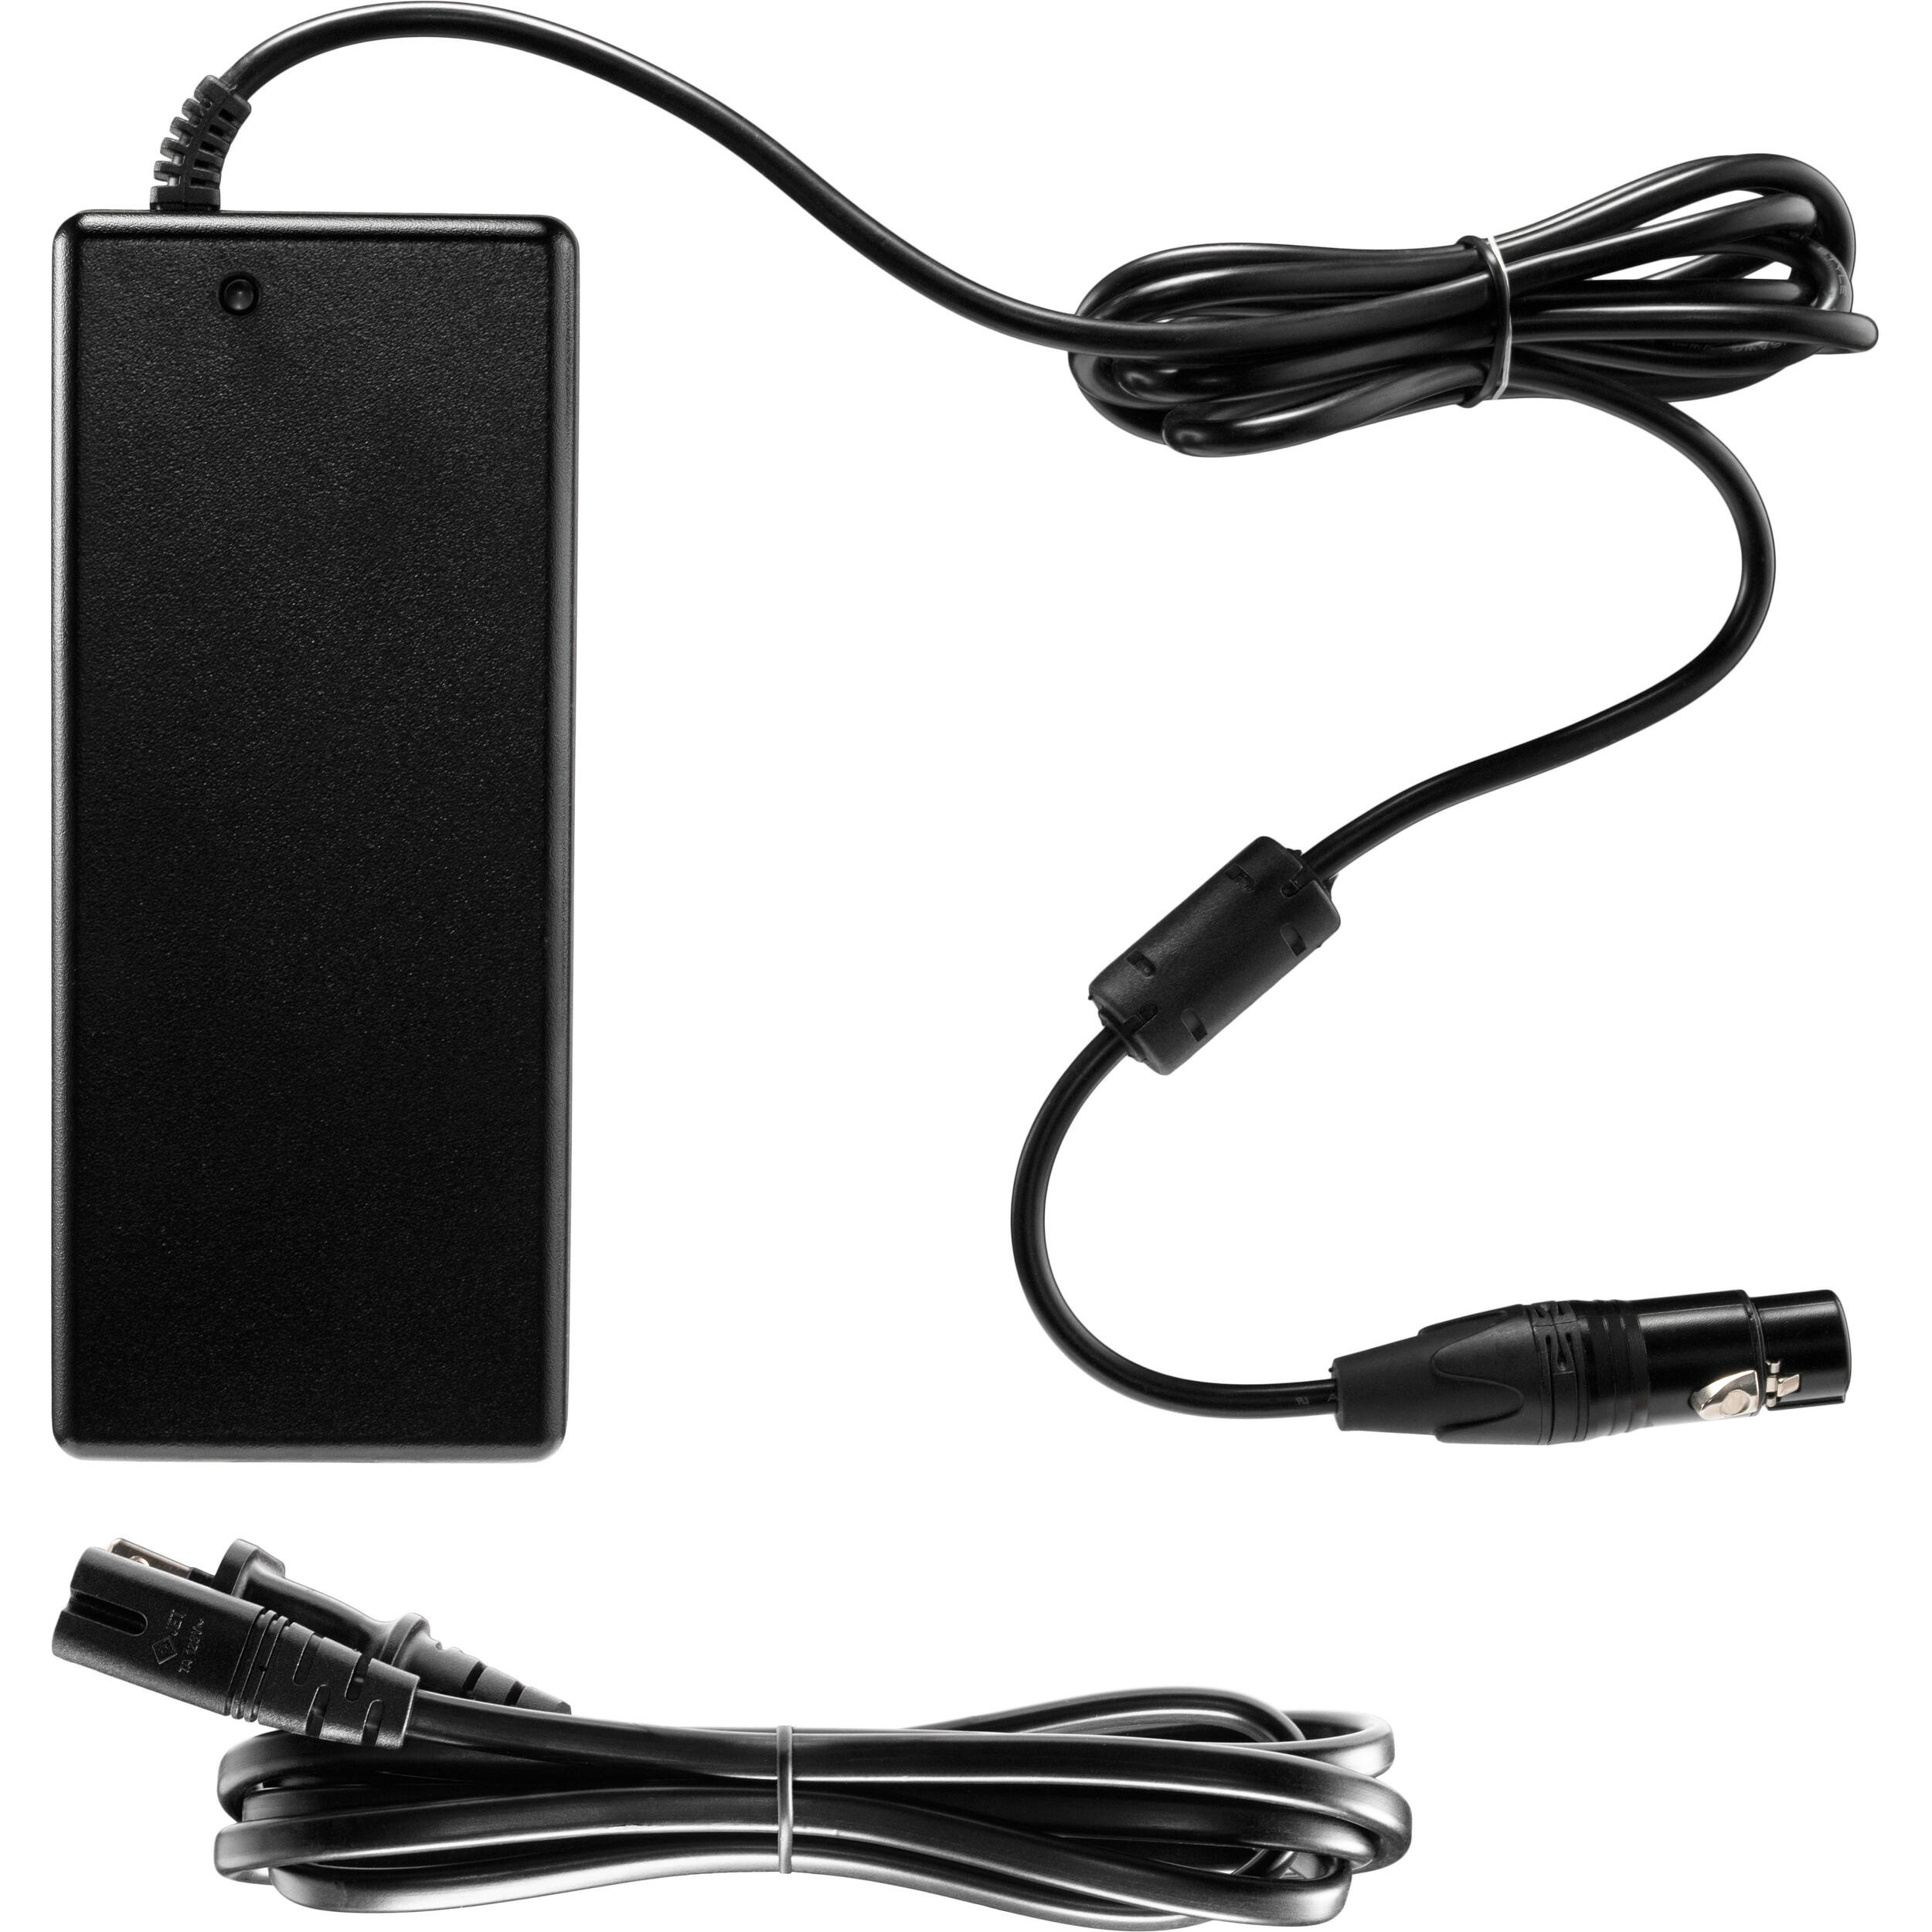 SmallHD Power Supply for 4K Monitor Series